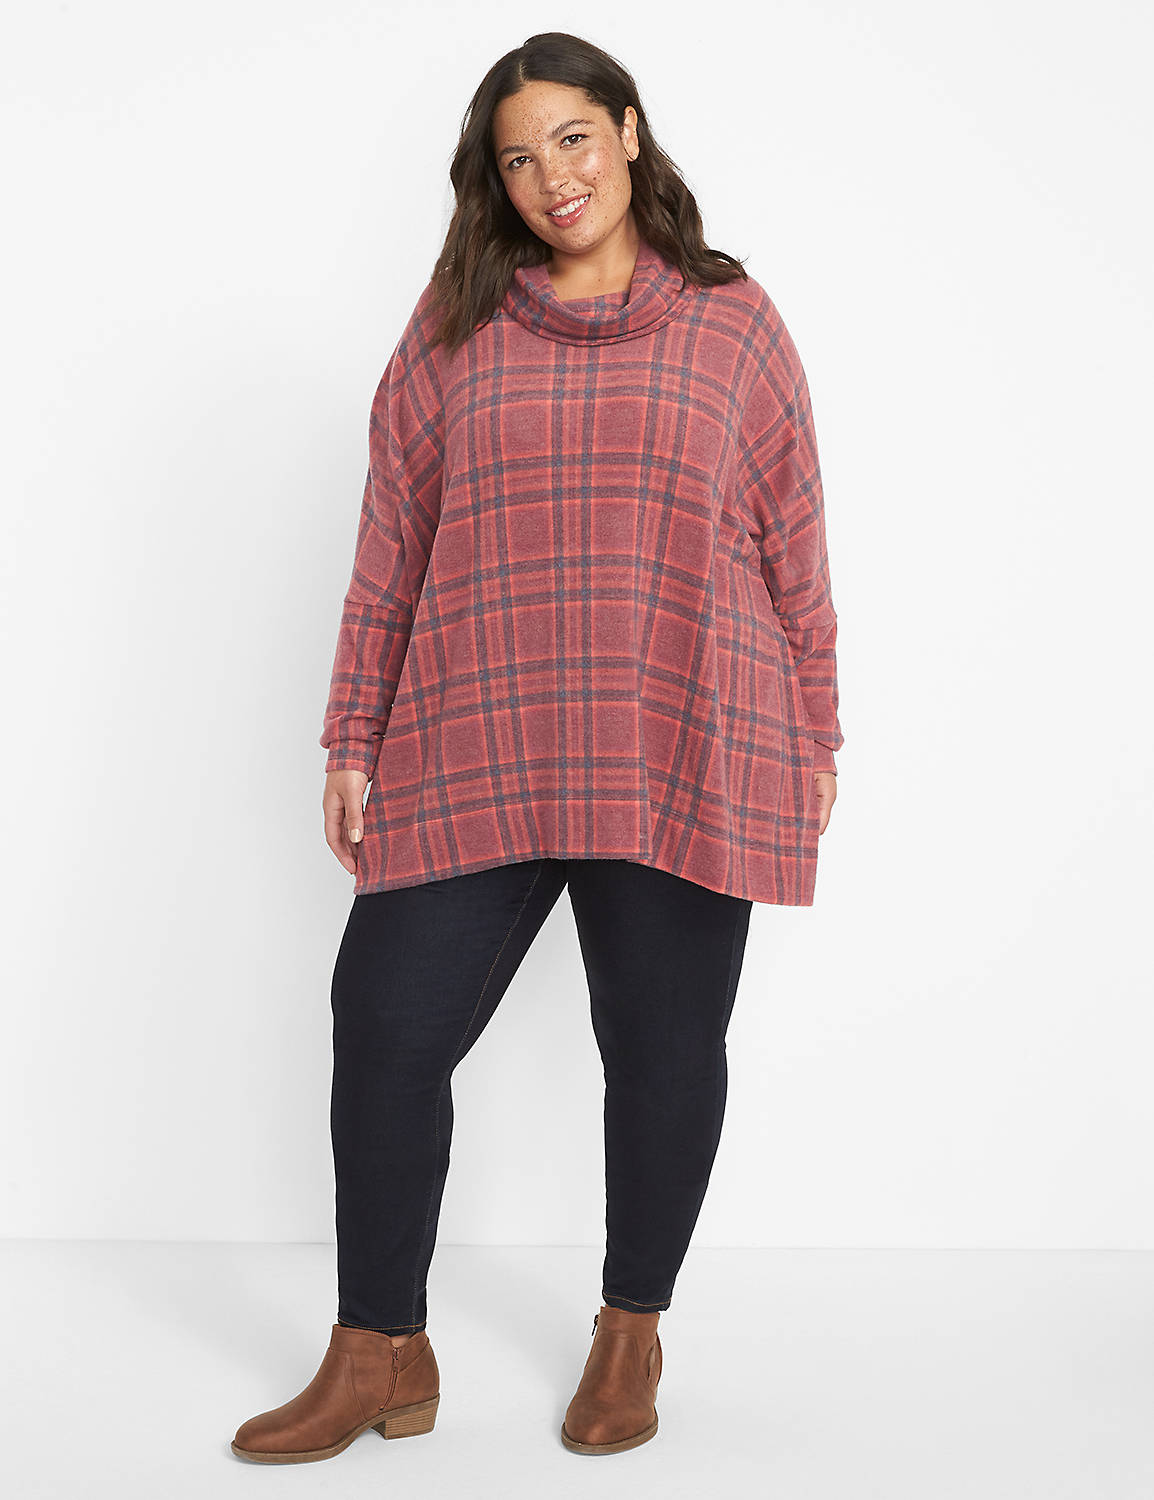 Long Sleeve Cowl Neck Boxy Body In Plaid Knit 1124632:LBH21164_MontanaPlaidTwill_CW19:30/32 PETITE Product Image 3